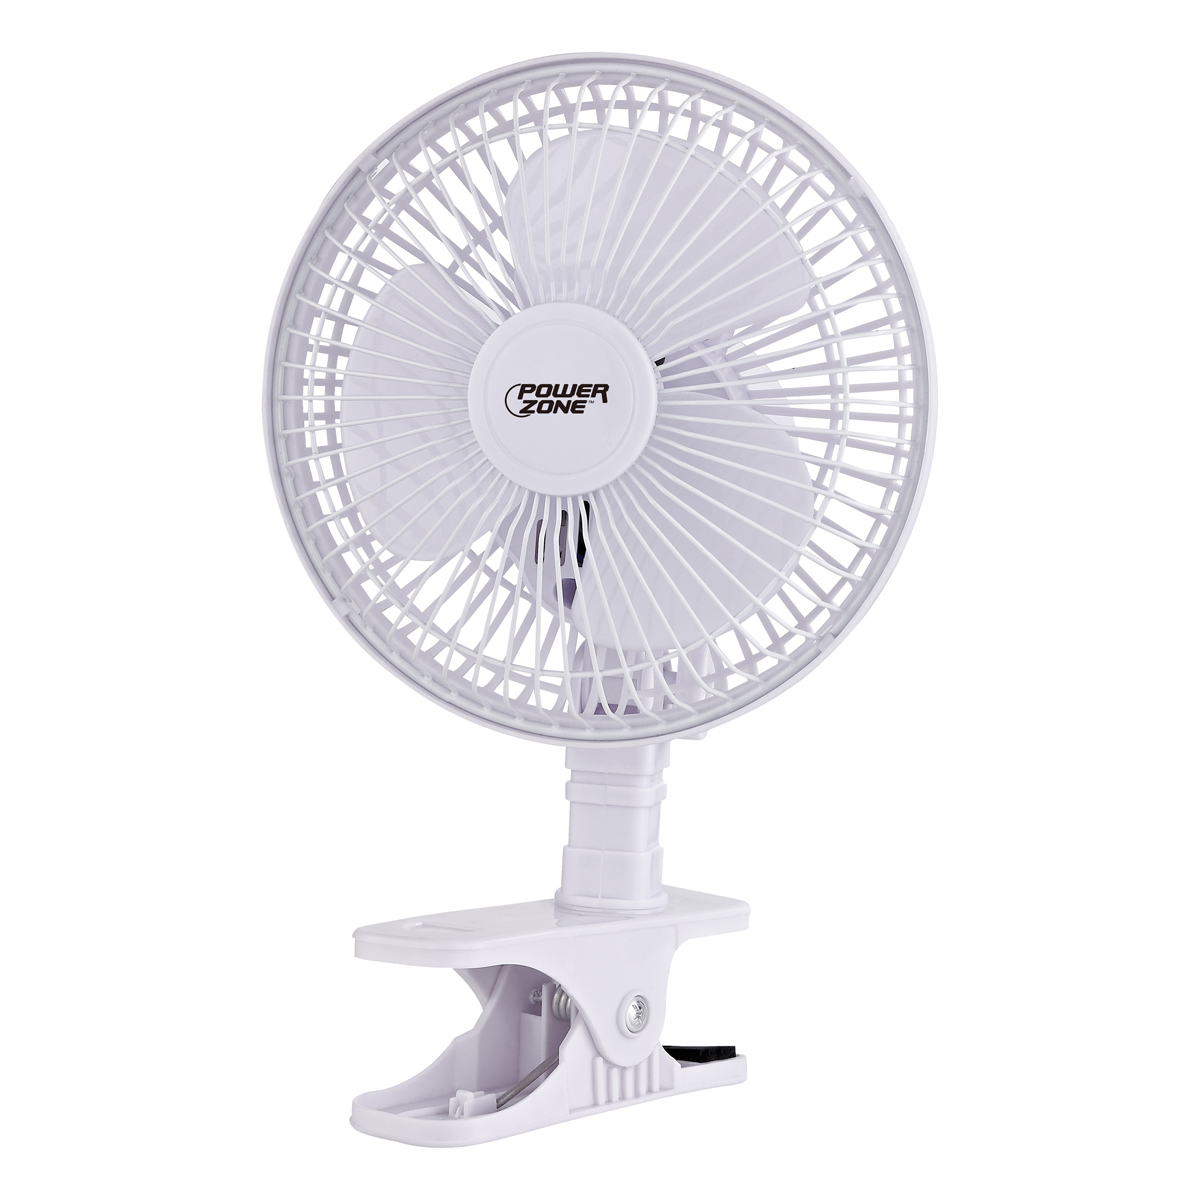 FT-602 Clip-on Oscillating Portable Fan, 120 VAC, 6 in Dia Blade, 3-Blade, 2-Speed, 2 Speed, White